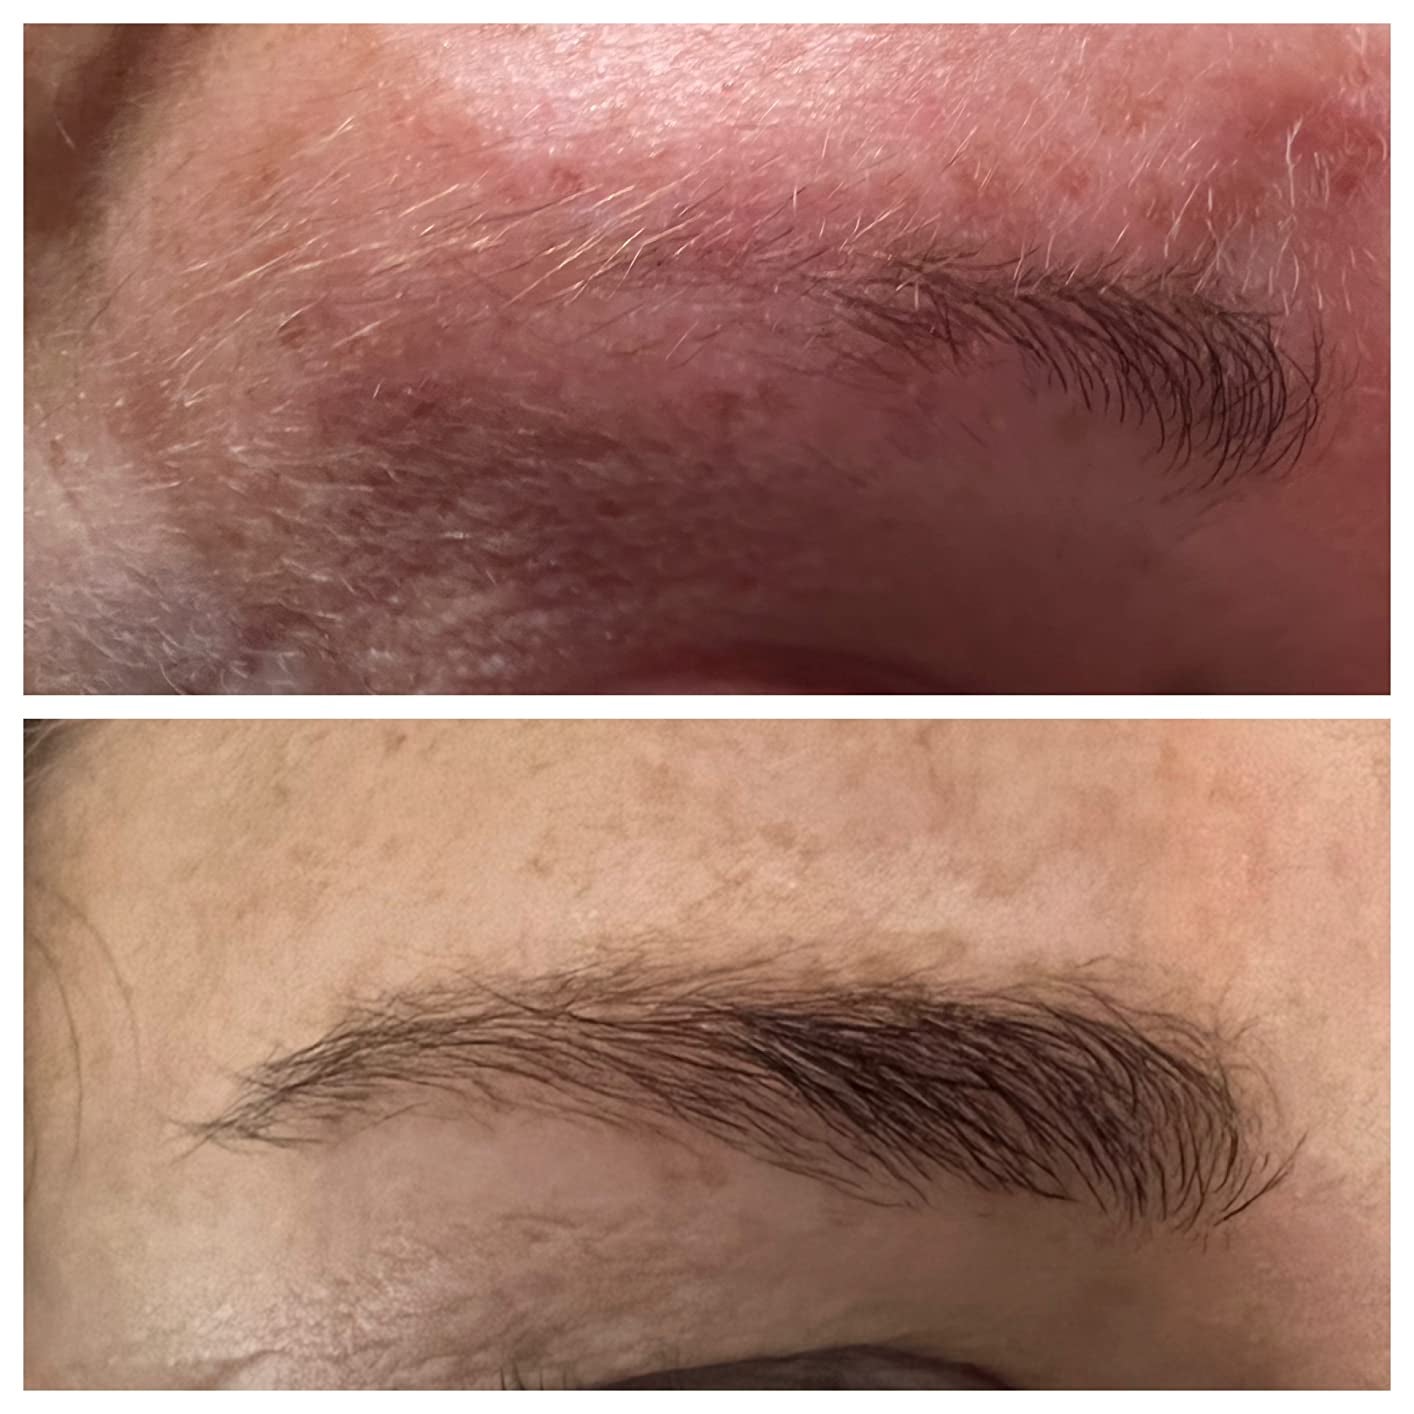 reviewer's eyebrow before and after using serum with noticeable growth